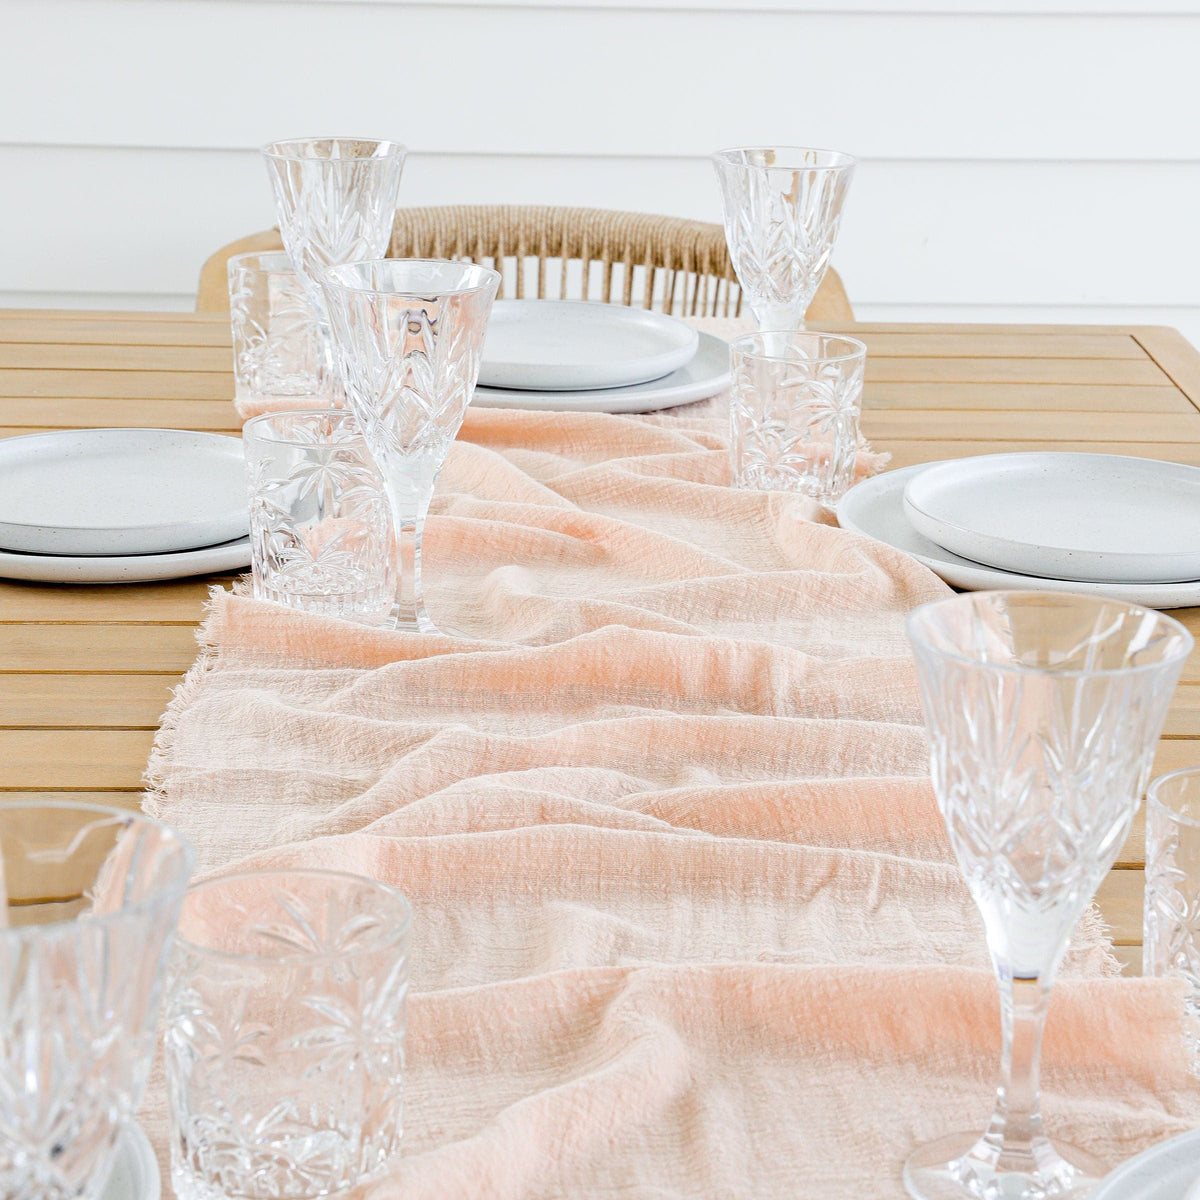 Sample Rustic Cotton Table Runners - 3m